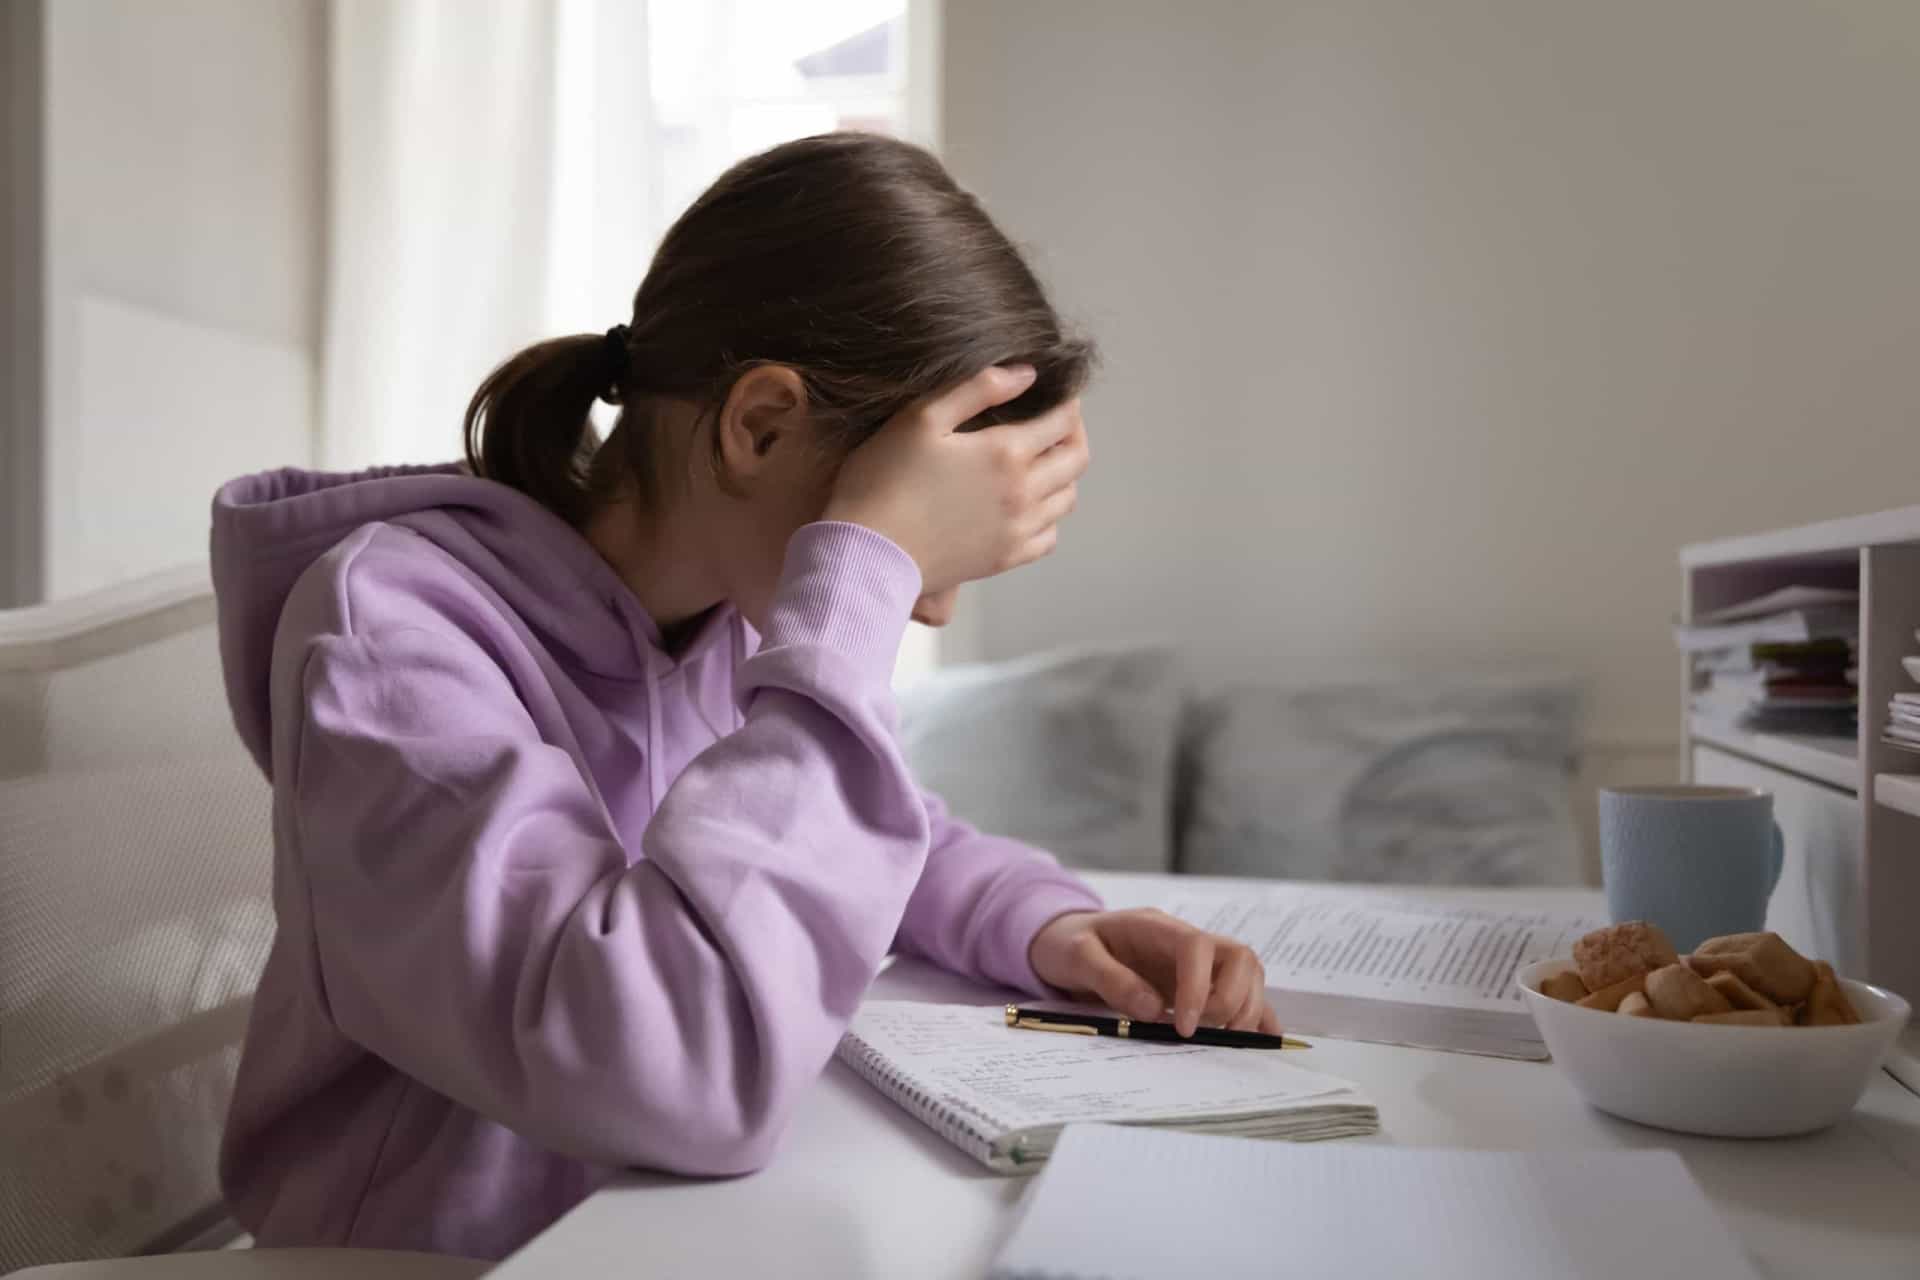 <p><span>Children who suffer from selective mutism generally have a tendency towards anxiety and may find it difficult to take everyday events in their stride.</span></p><p>You may also like:<a href="https://www.starsinsider.com/n/281704?utm_source=msn.com&utm_medium=display&utm_campaign=referral_description&utm_content=521574en-us"> Vlad the Impaler and the legend of Dracula</a></p>